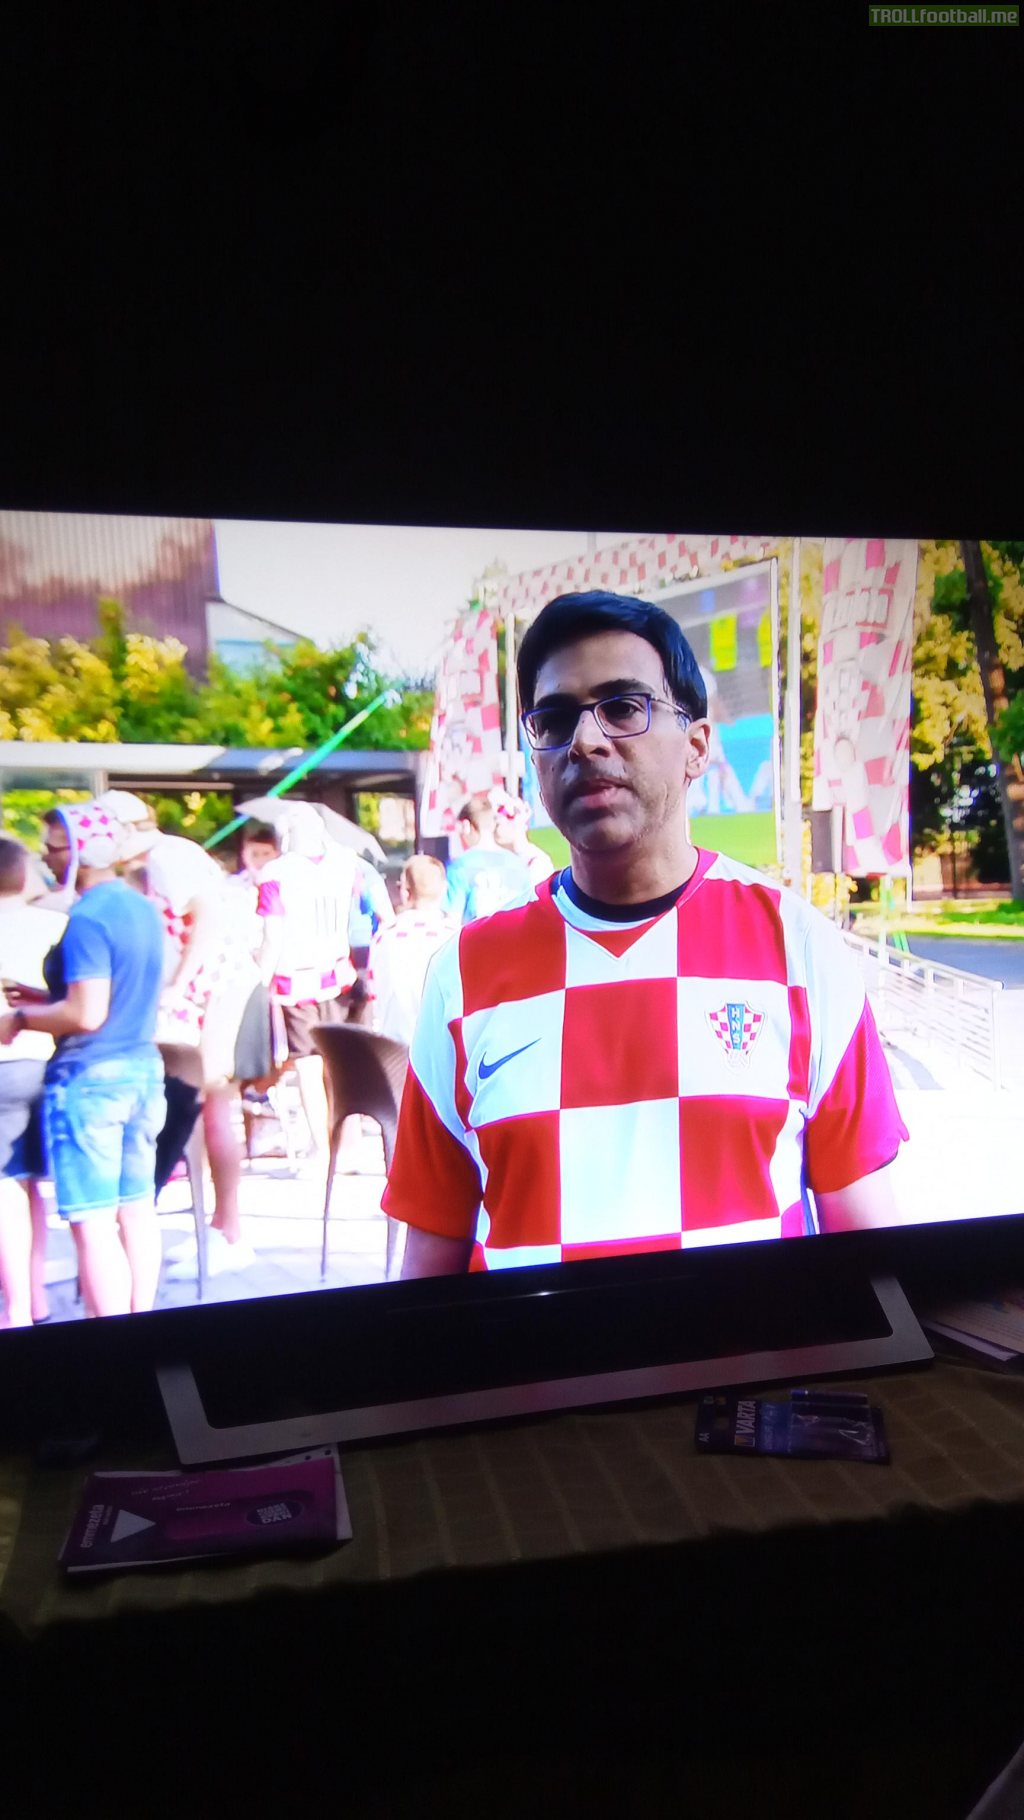 Former chess World Champion Vishy Anand supporting Croatia in the Euros